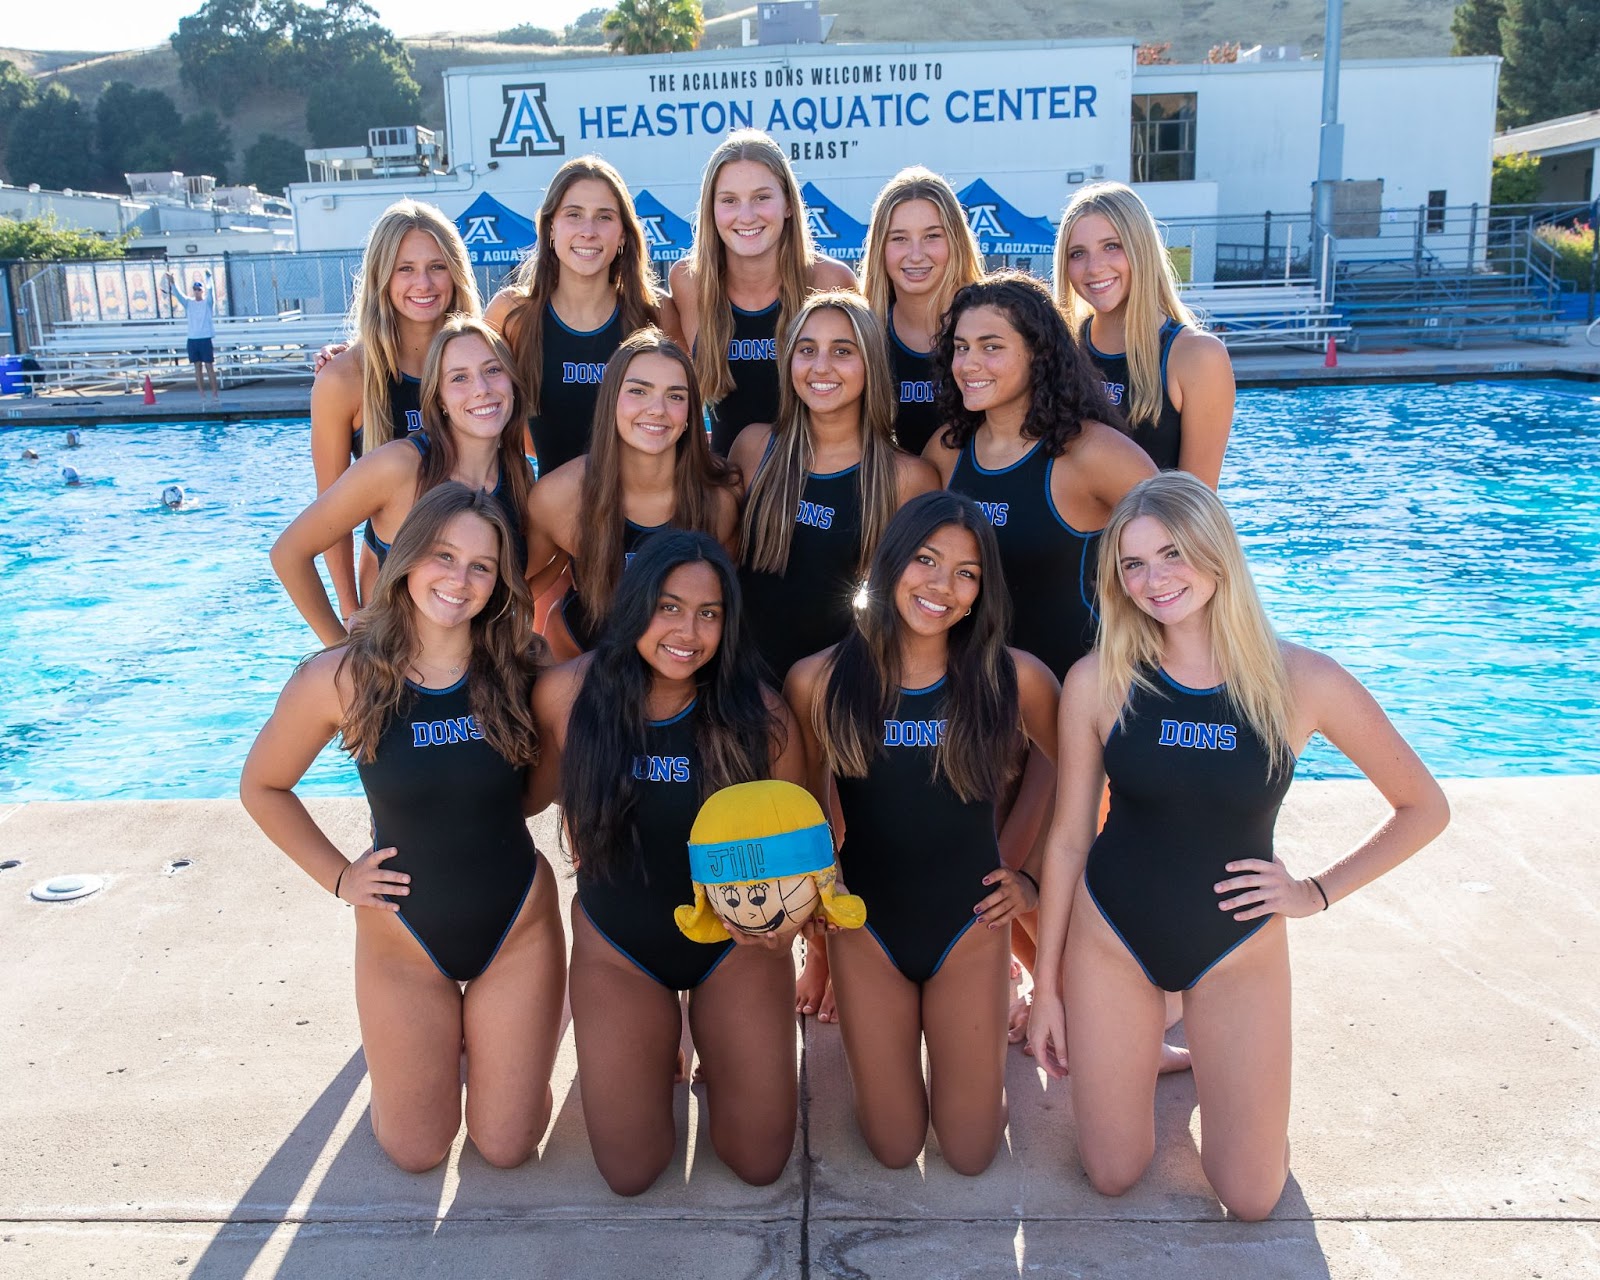 A Big Few Weeks for Lady Dons Water Polo